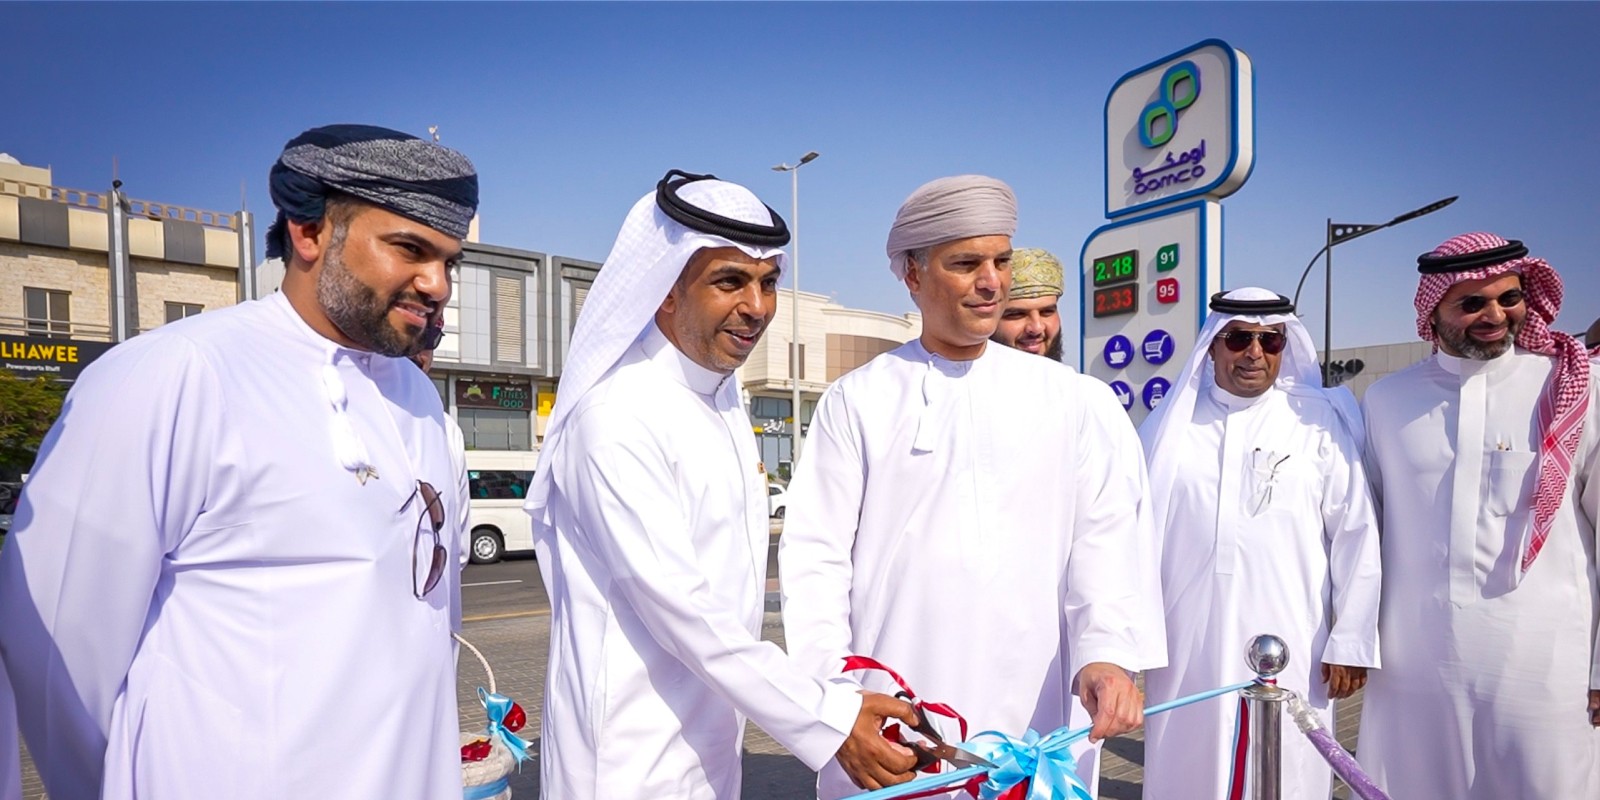 OMAN OIL MARKETING COMPANY EXPANDS FOOTPRINT IN SAUDI ARABIA WITH 14 NEW SERVICE STATIONS